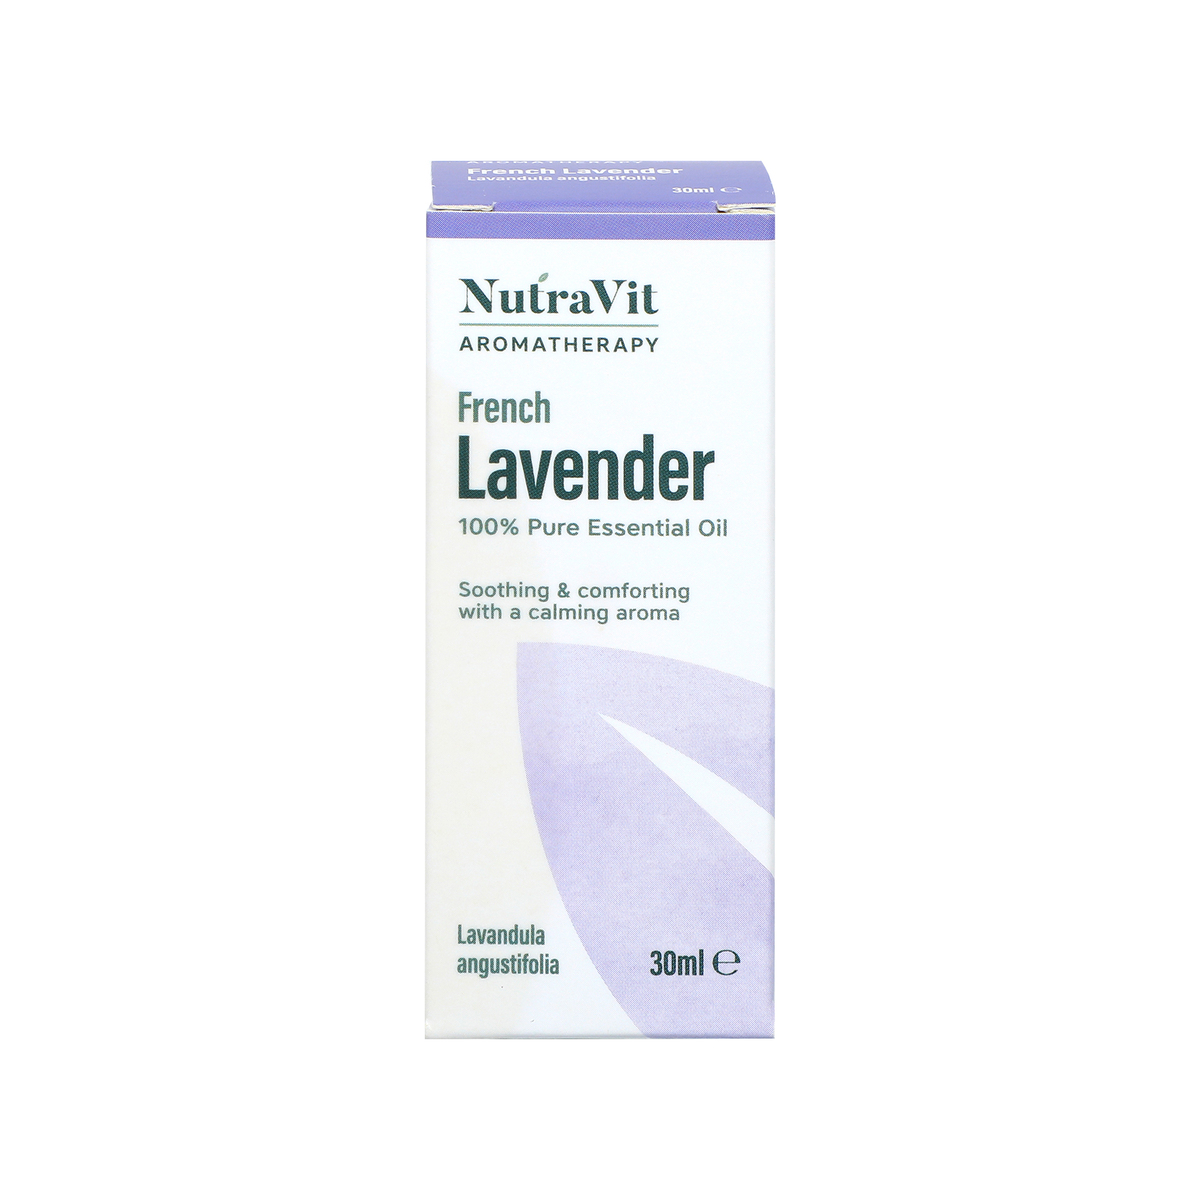 Nutra Vit French Lavender Pure Essential Oil 30ml